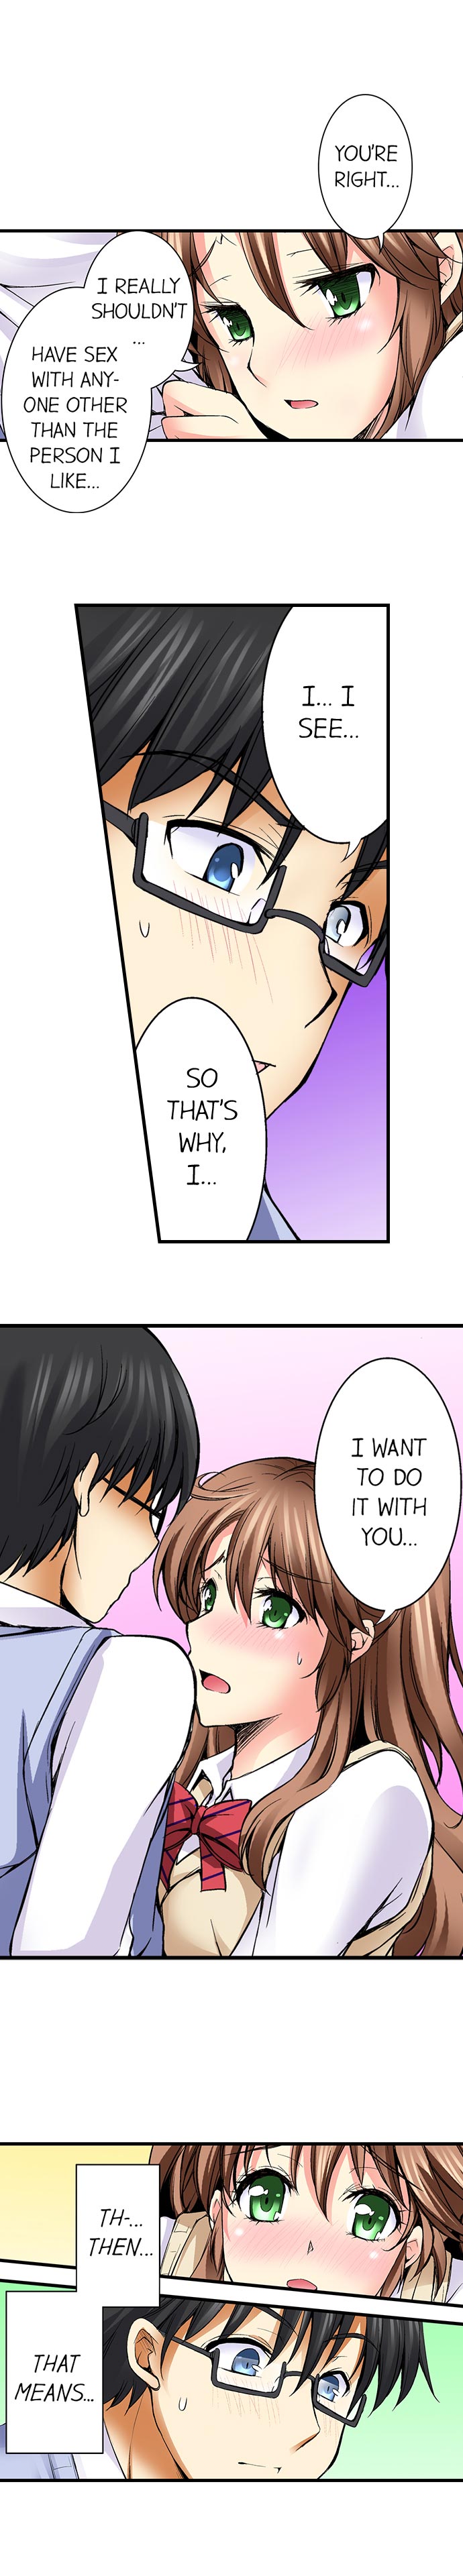 Why Can't i Have Sex With My Teacher? - Chapter 8 Page 6